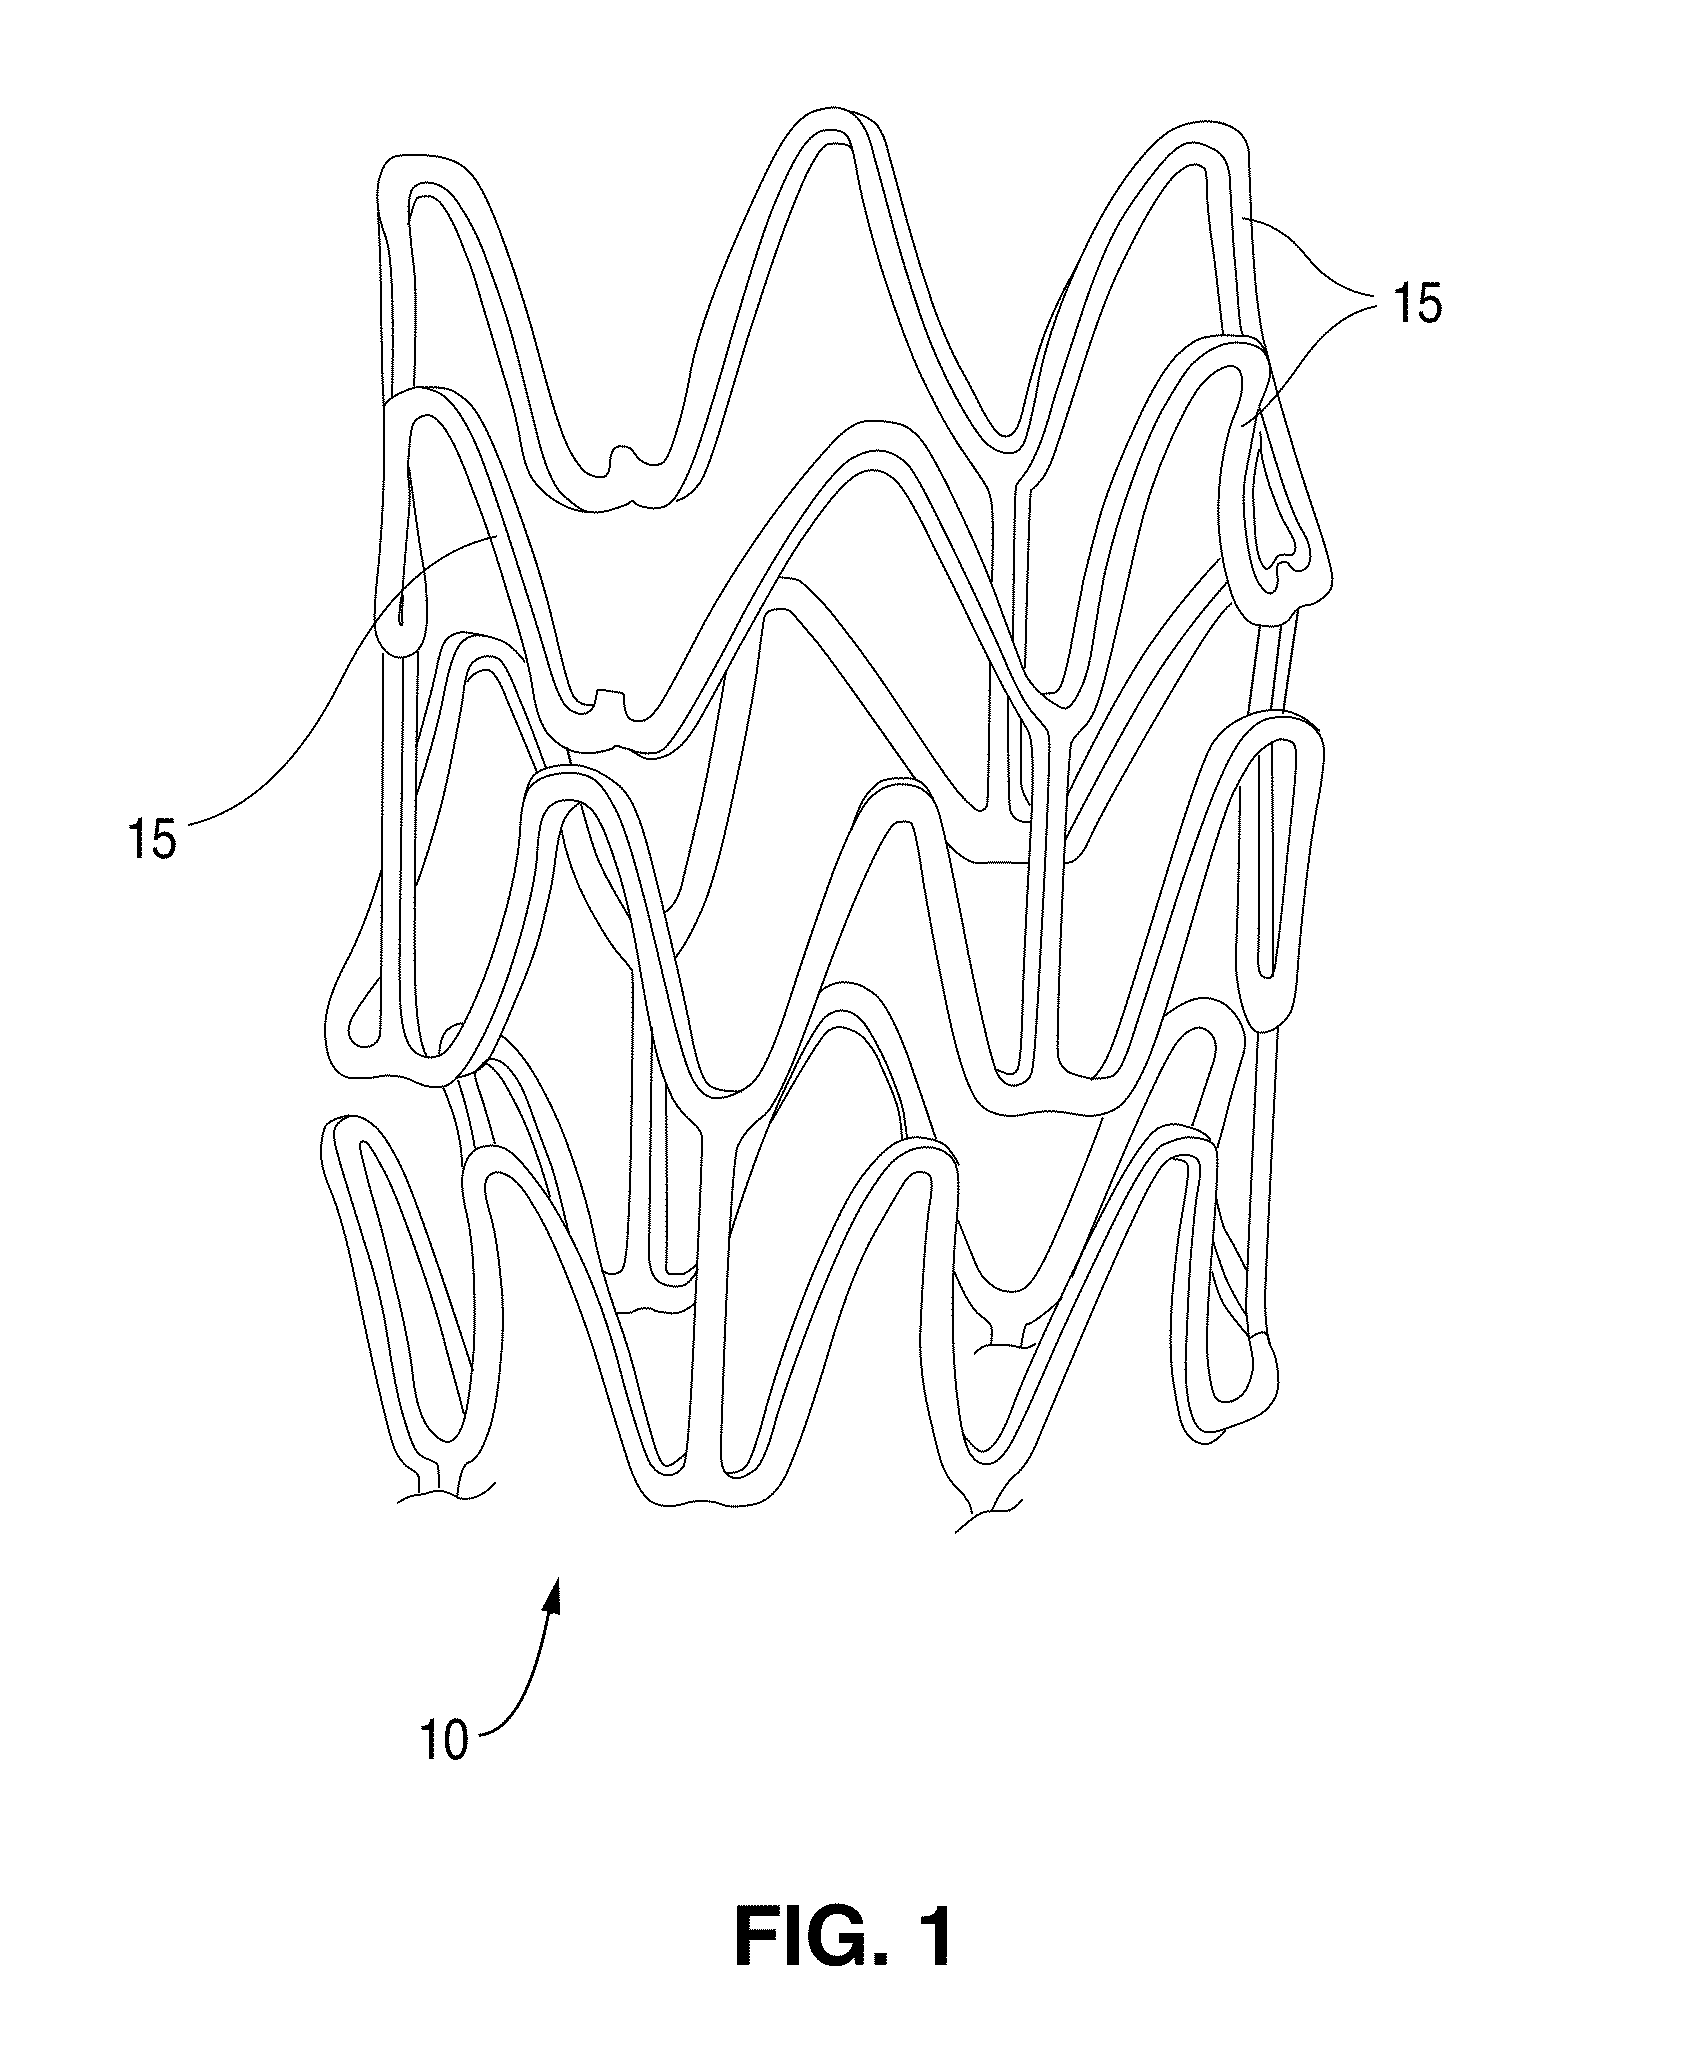 Methods Of Providing Antioxidants To Implantable Medical Devices